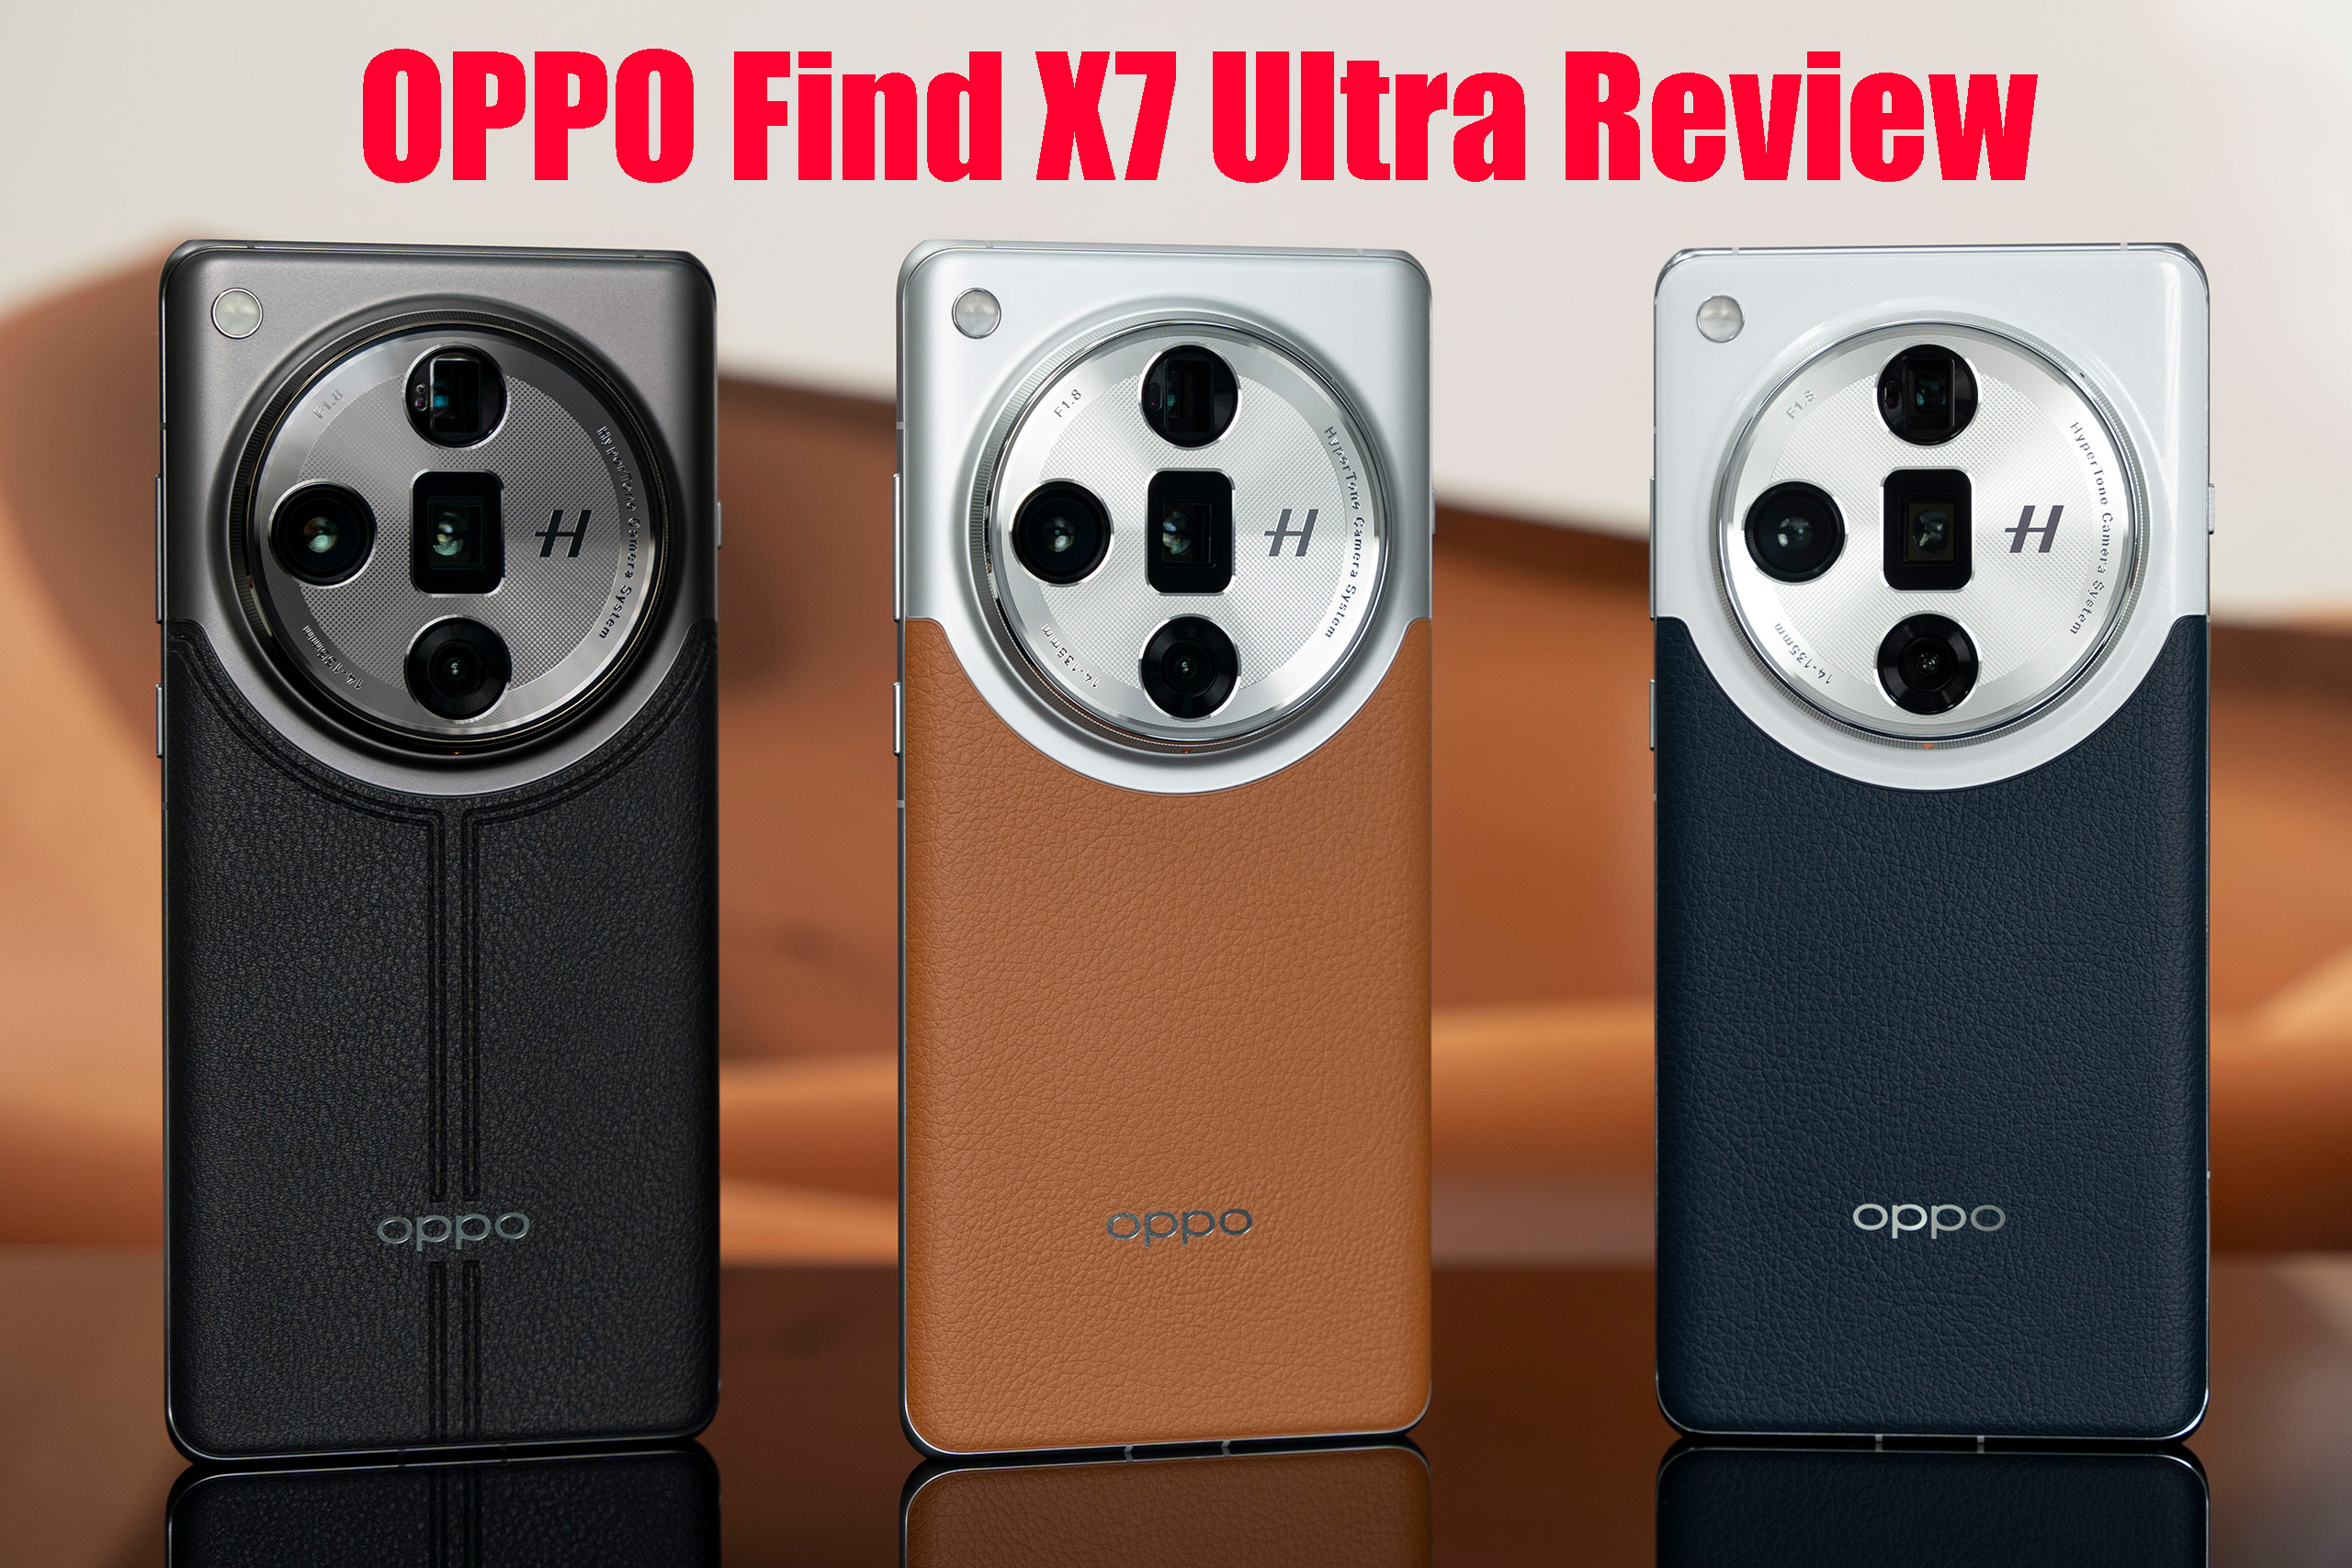 OPPO Find X7 Ultra Review